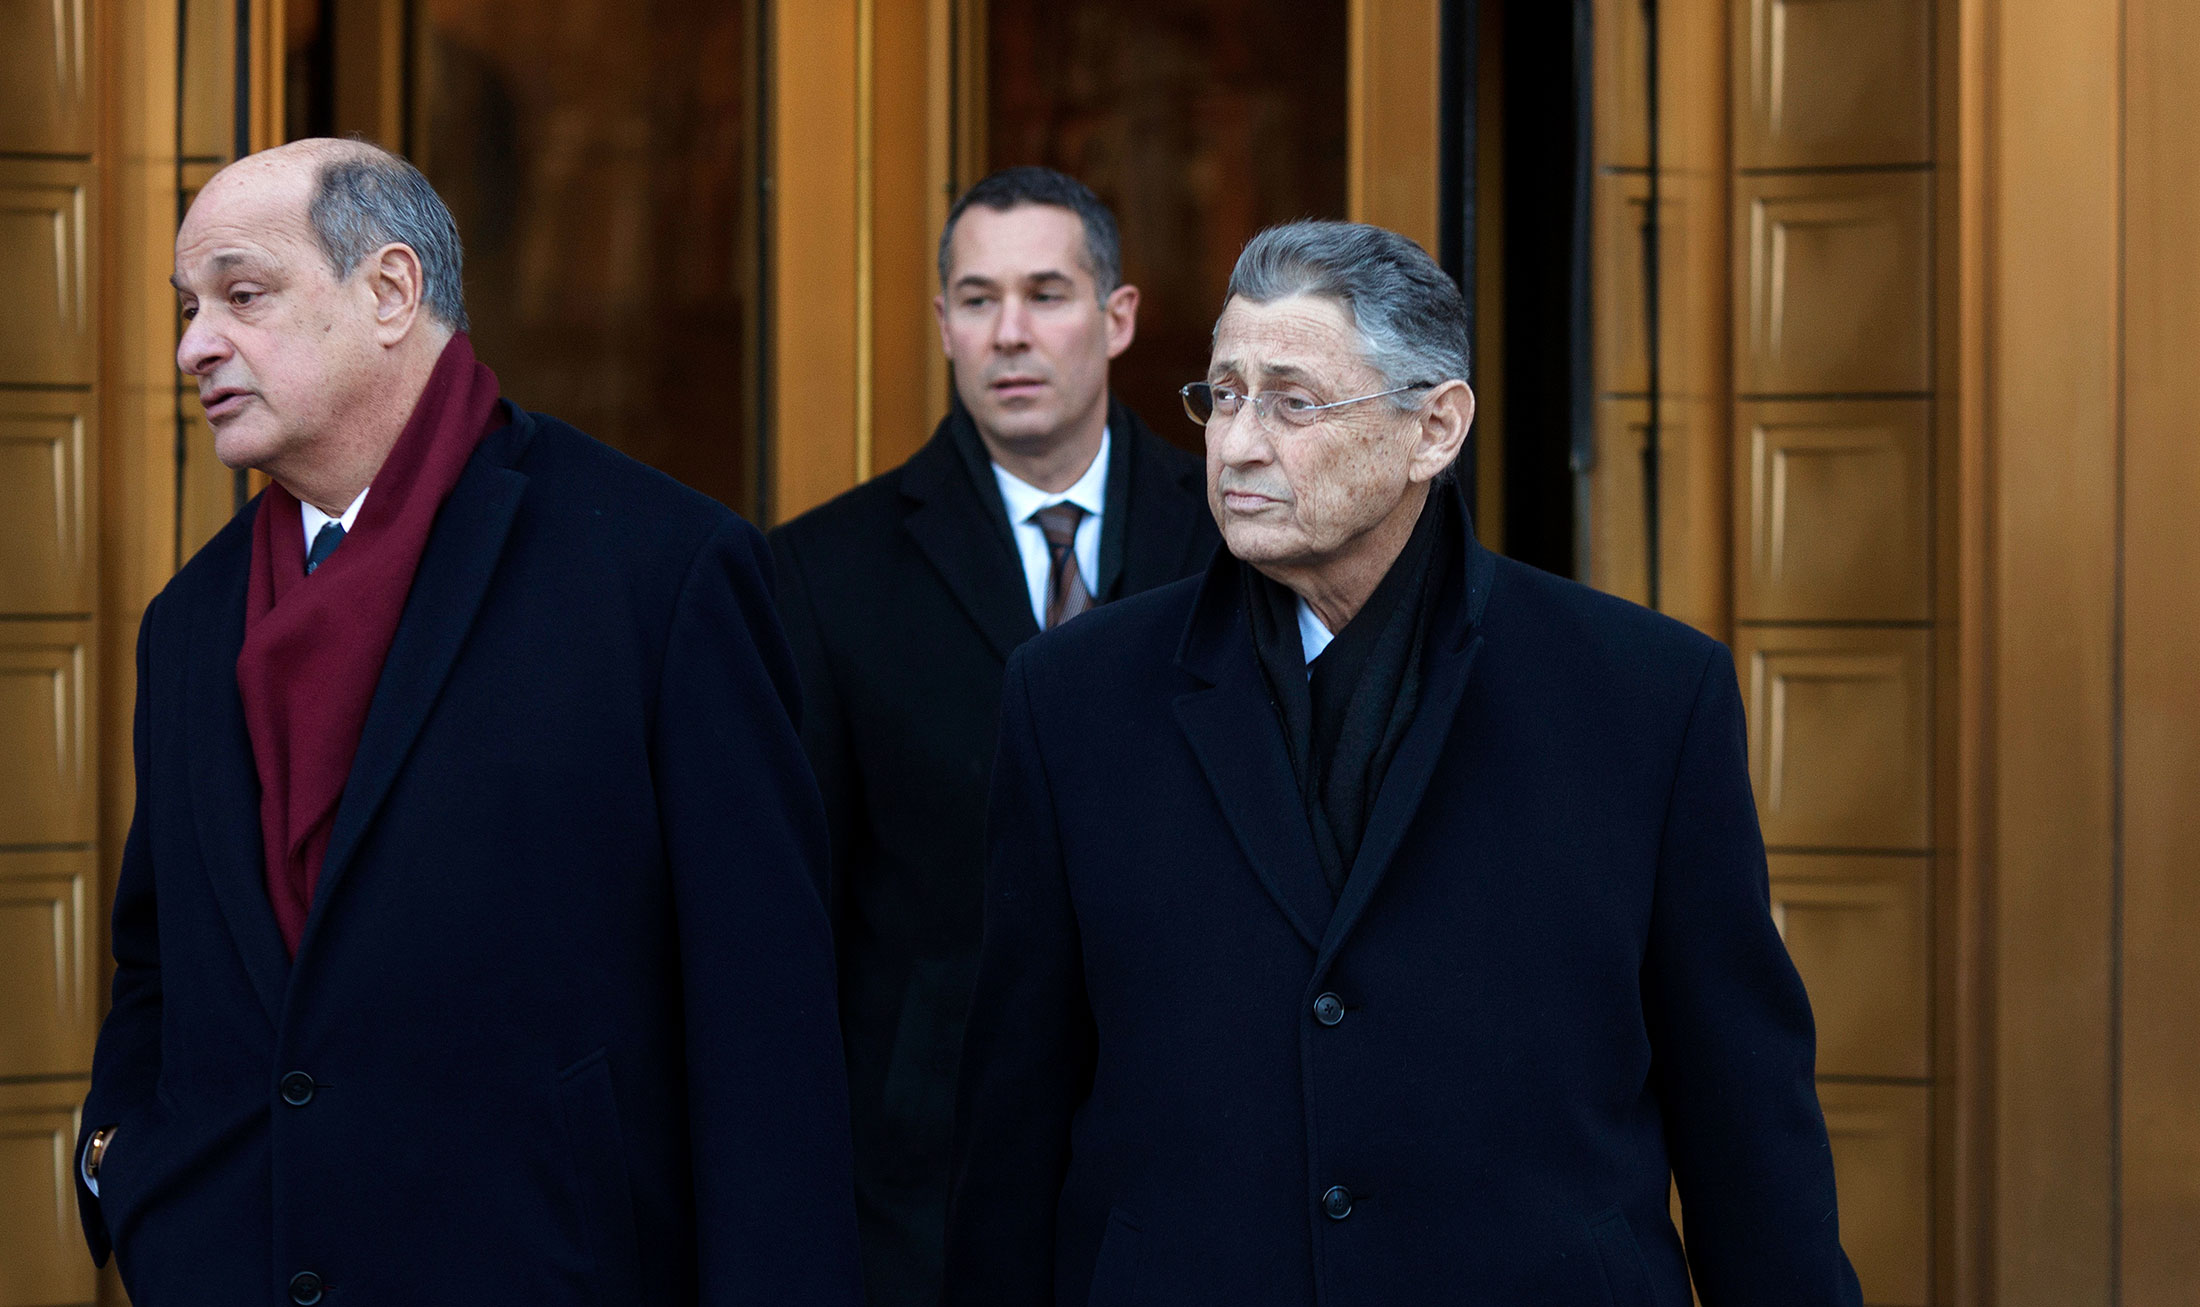 Sheldon Silver, New York state assembly speaker, right, exits federal court in New York, on Jan. 22, 2015.
